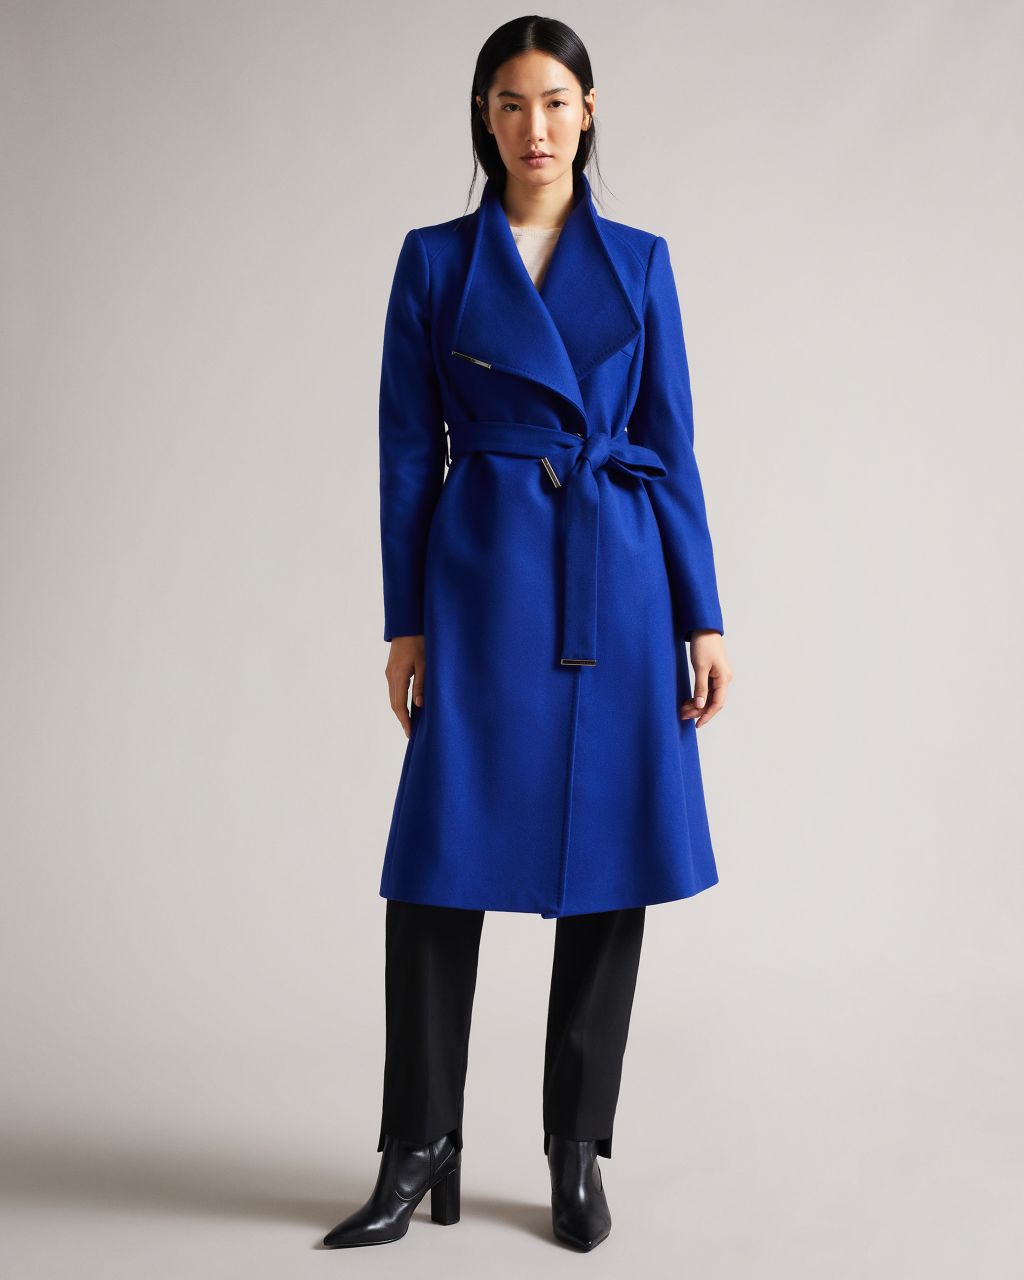 Women's Wool Wrap Coat in Bright Blue, Rose product